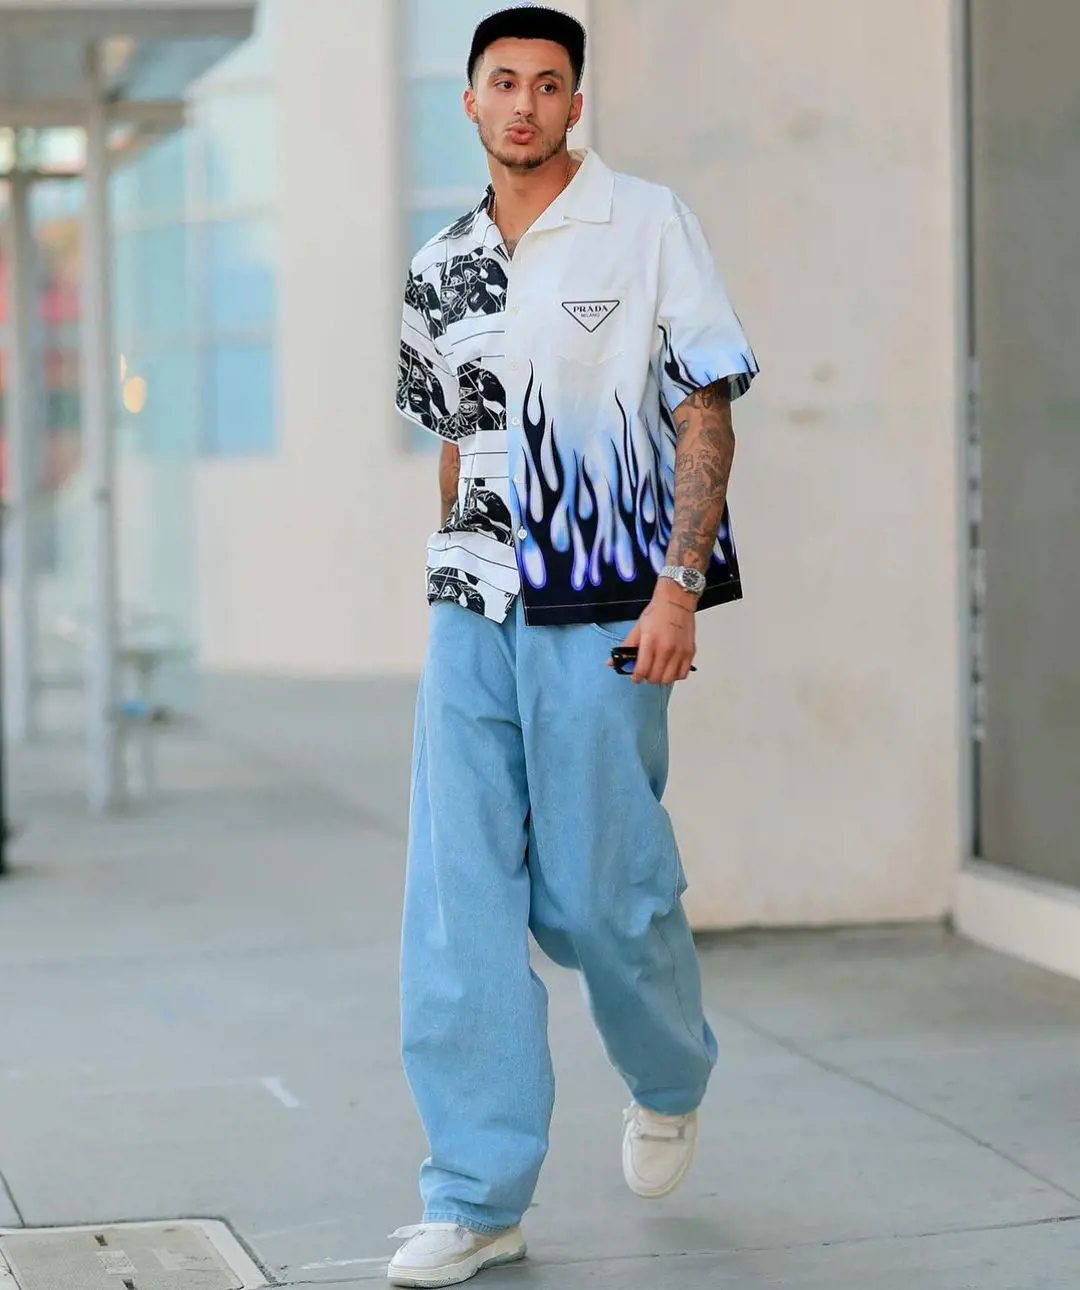 Kuzma in one of his casual looks on a Thursday in April 2023.